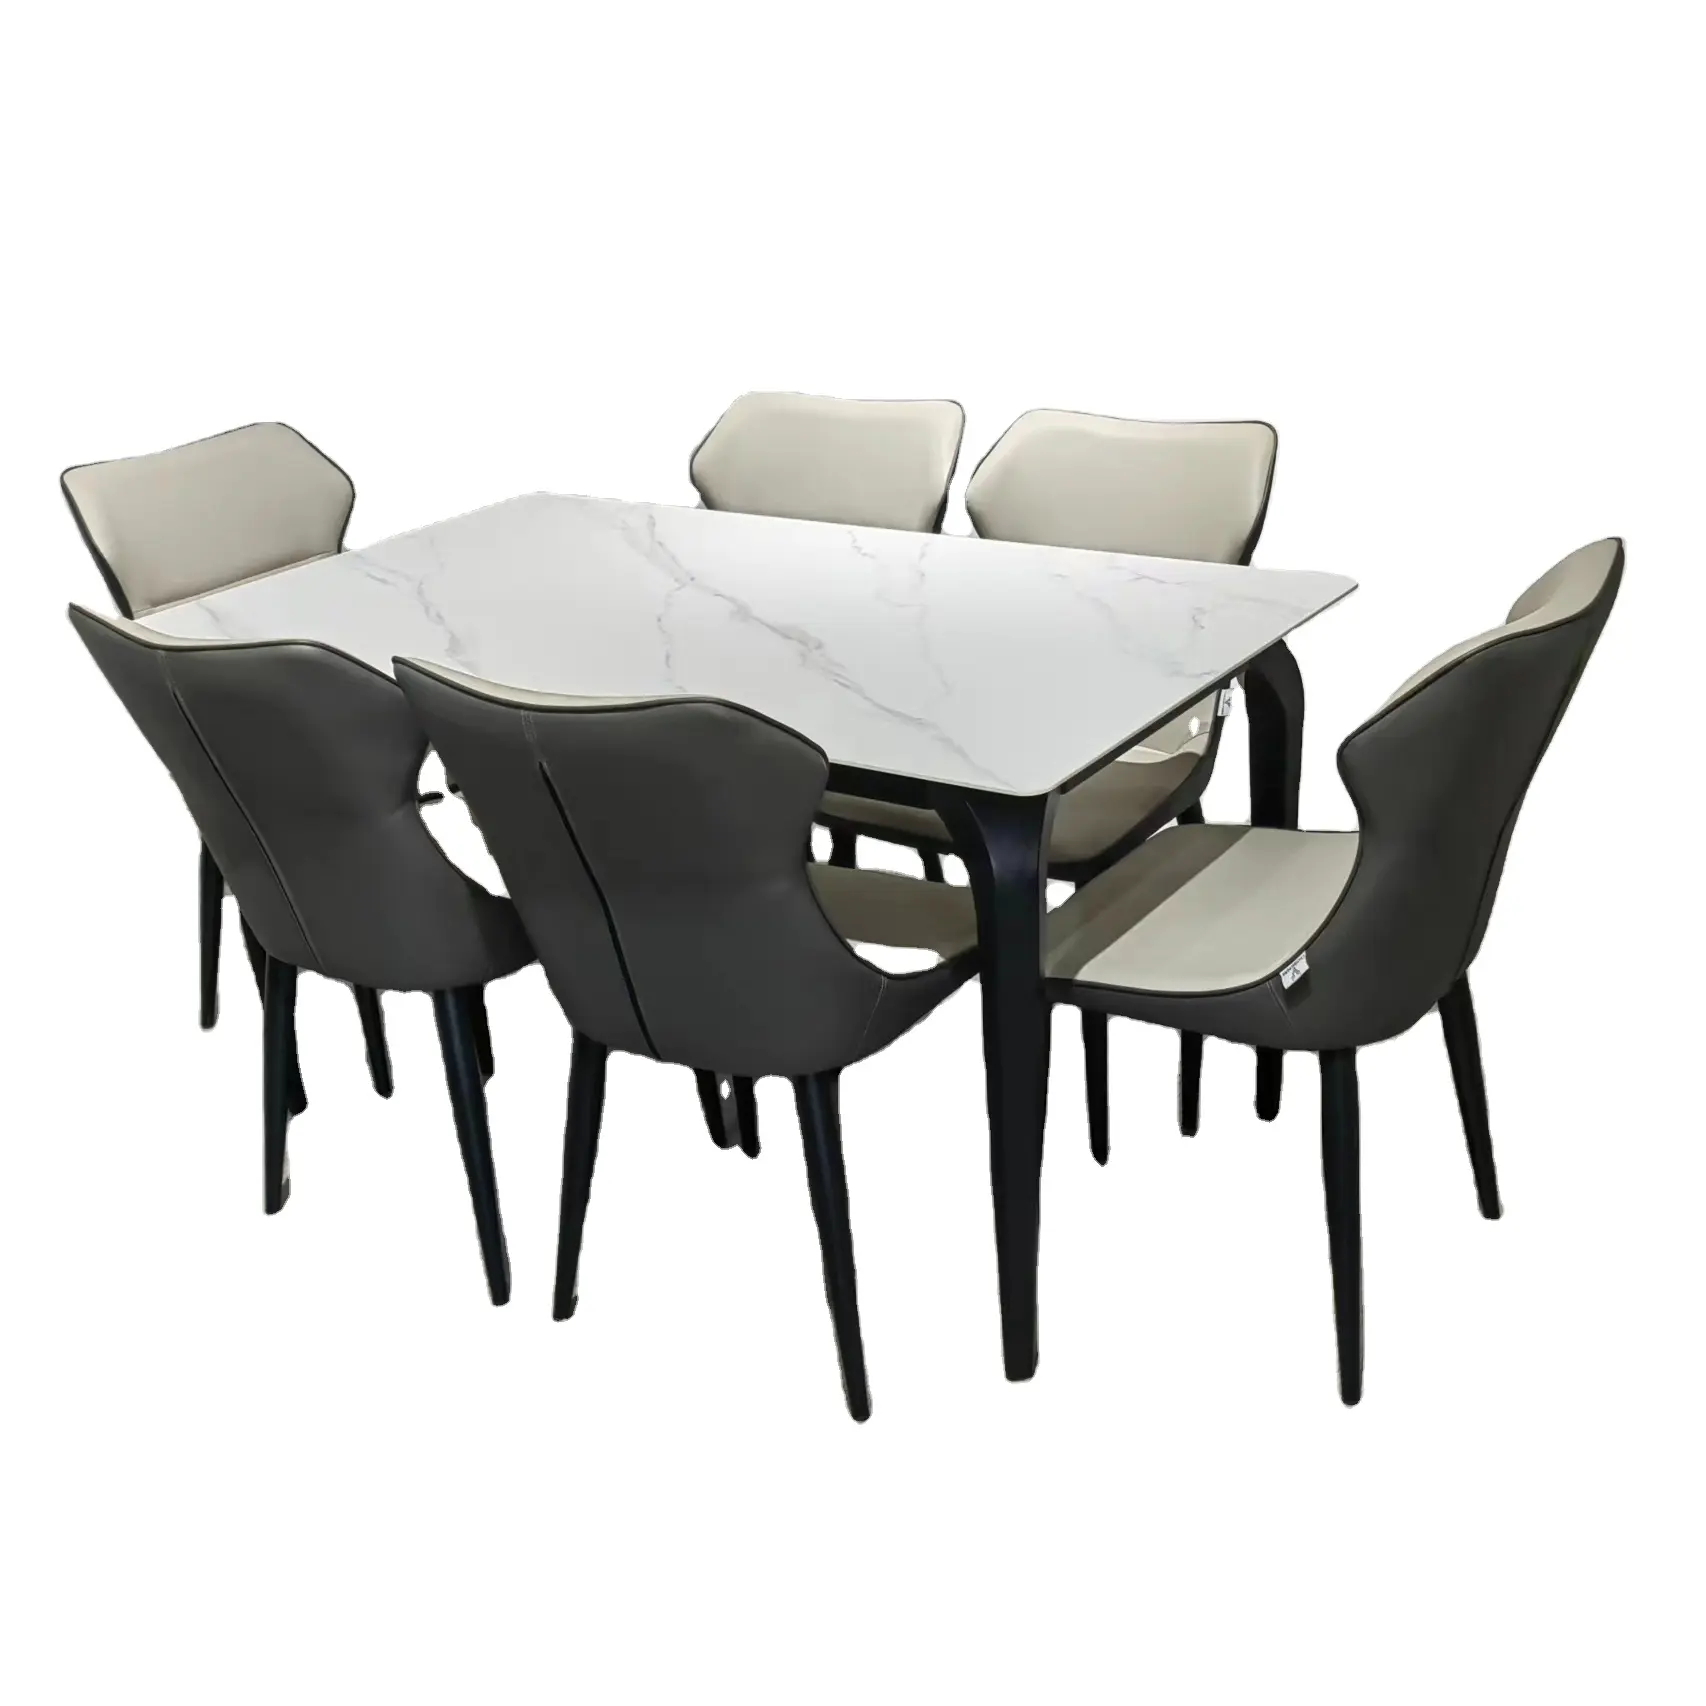 New Modern Dining Table Chair Set Rock Stone Table 1.4m Carbon Steel Leg PU Chair Furniture for Dining Room